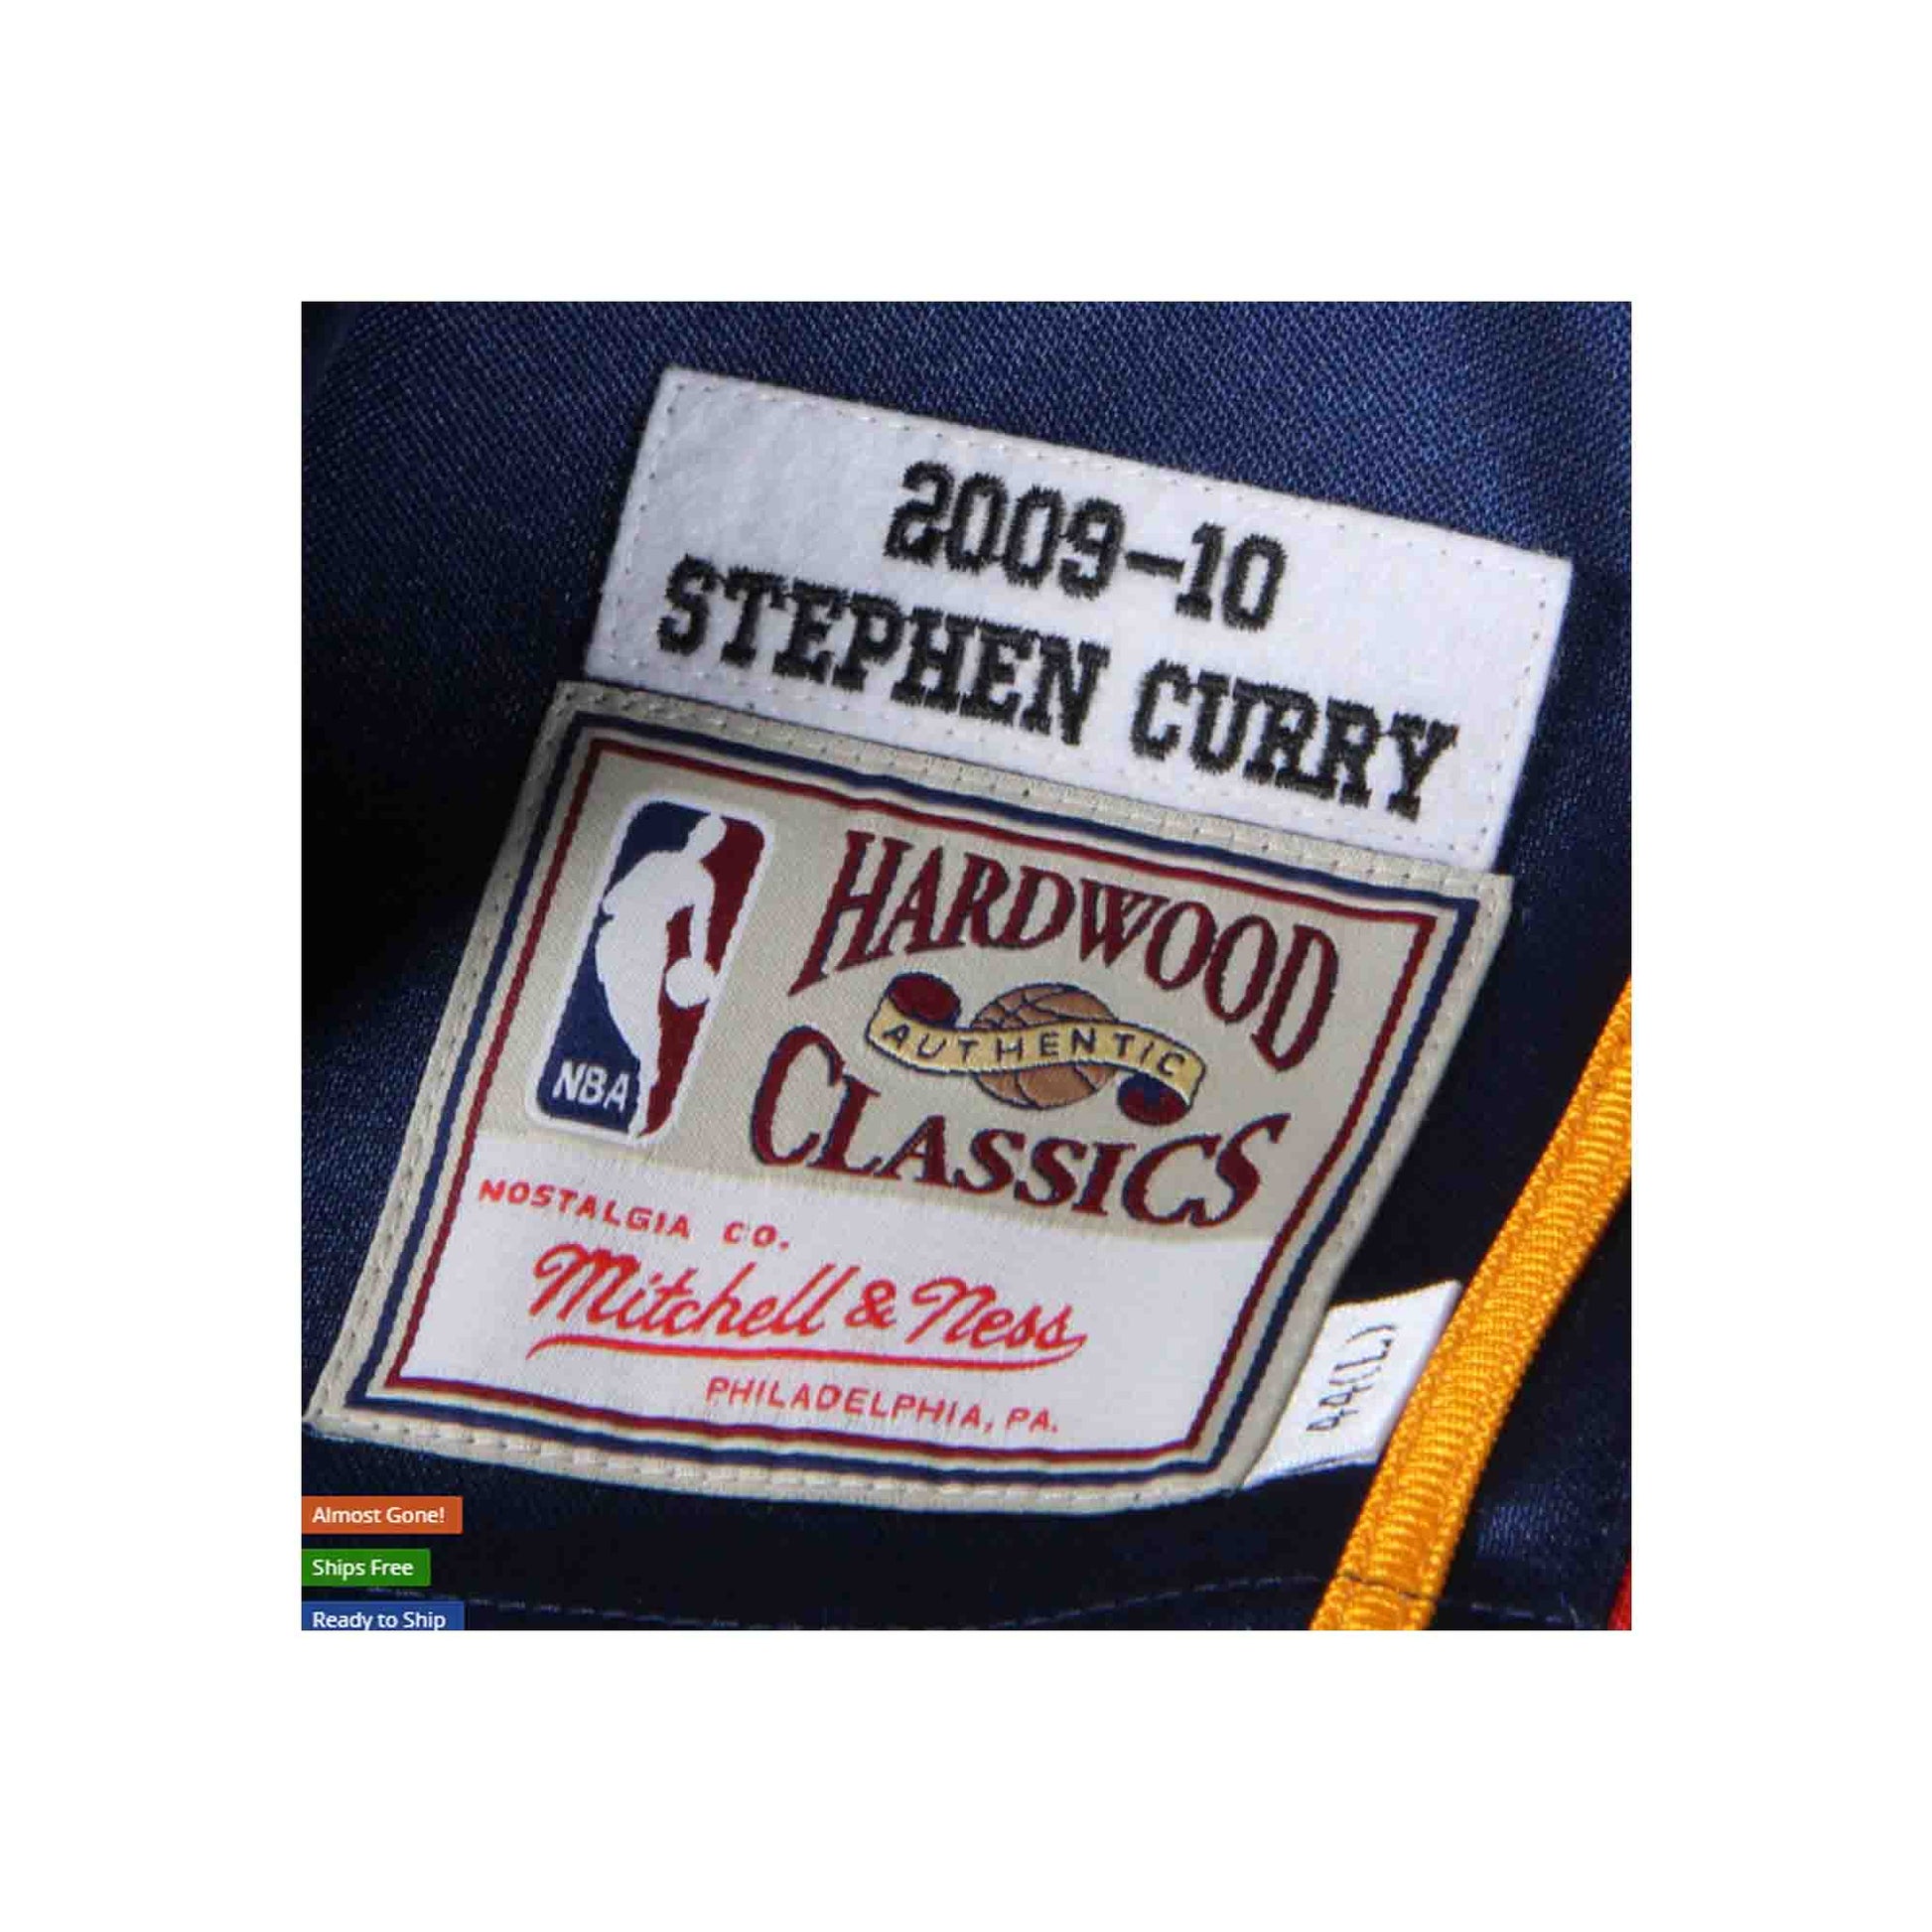 Stephen Curry 2009-10 Authentic Jersey Golden State Warriors Mitchell &  Ness Nostalgia Co.